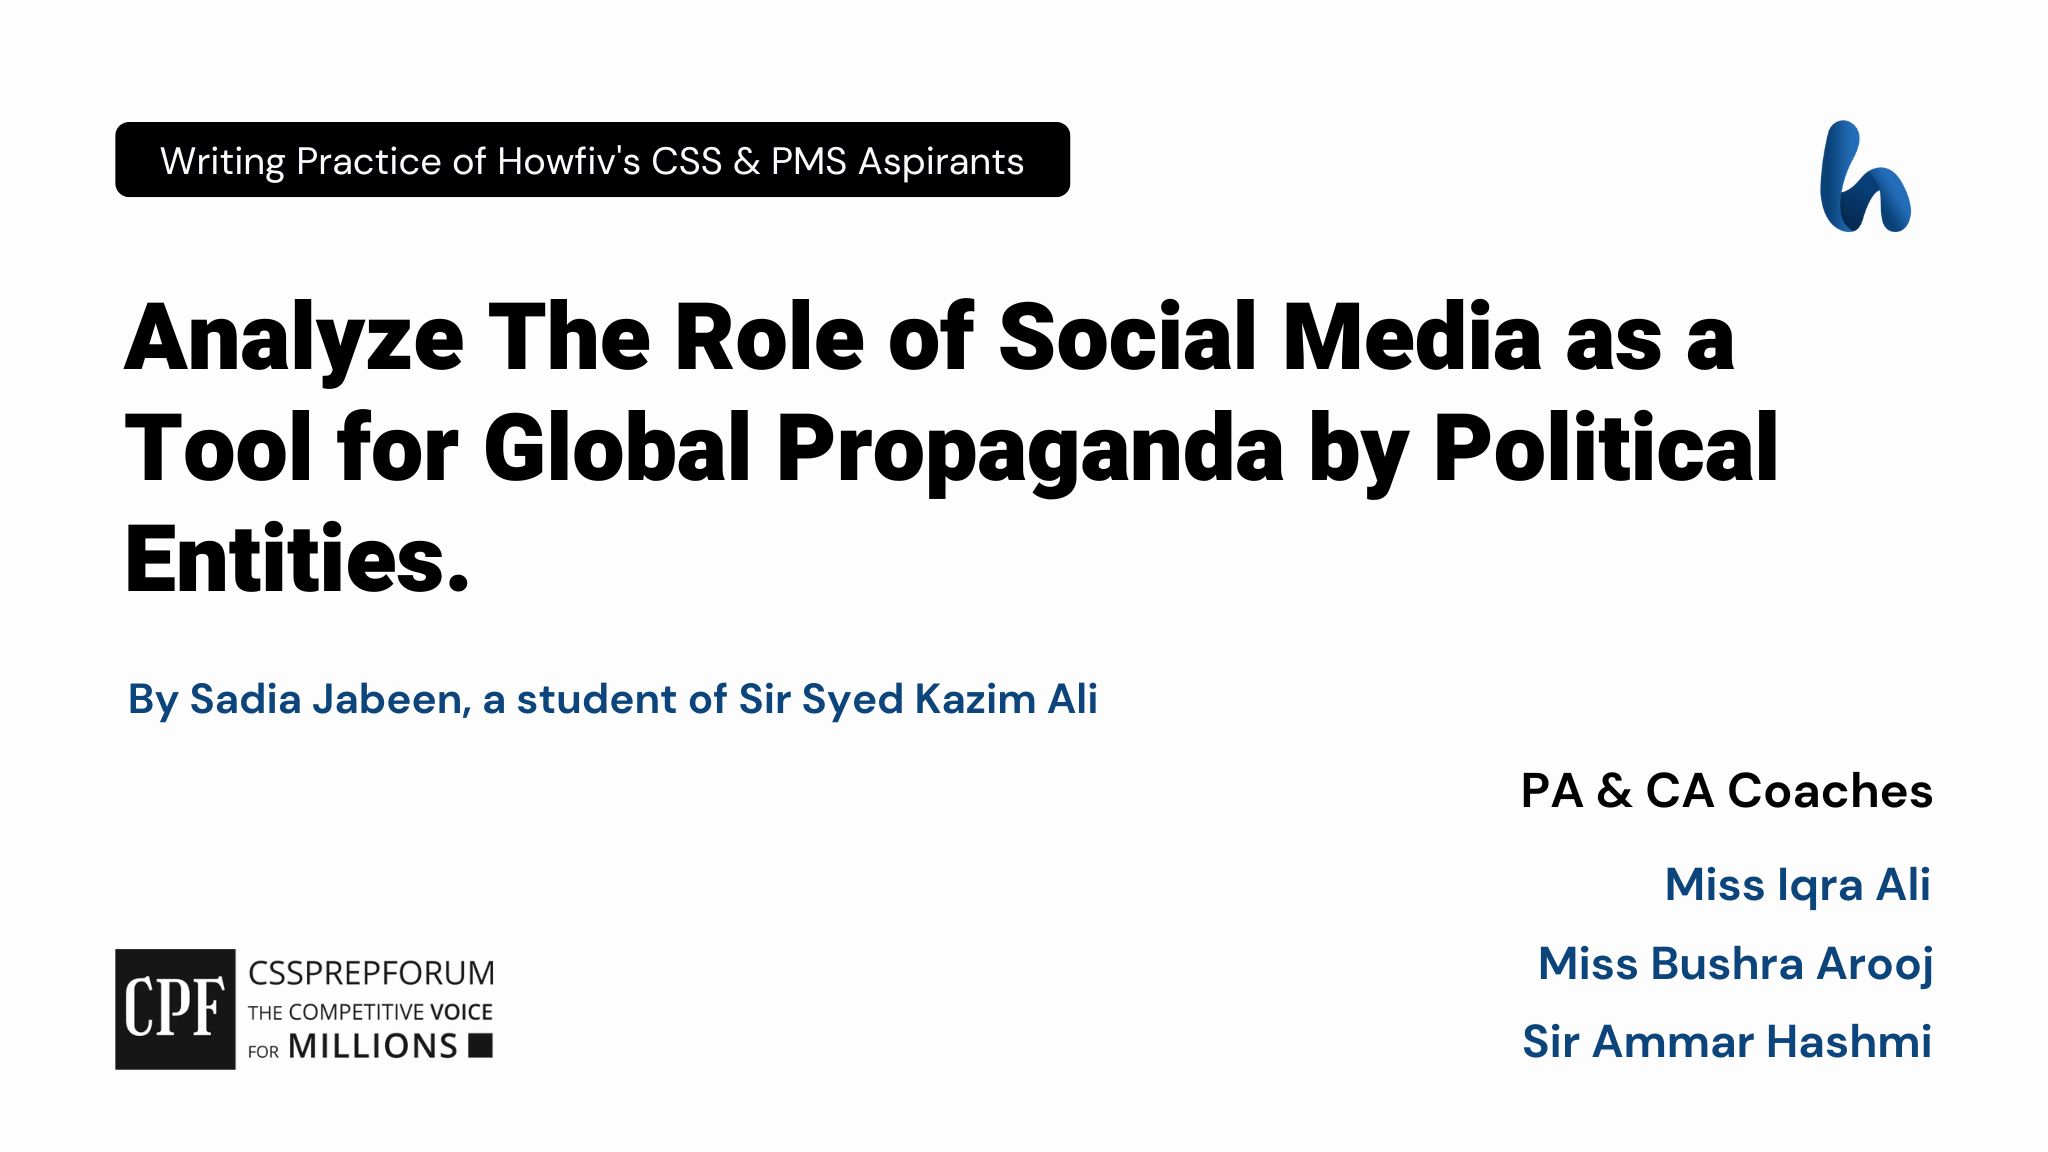 CSS Current Affairs article | Role of Social Media as a Tool for Global Propaganda | is written by Sadia Jabeen under the supervision of Miss Iqra Ali...